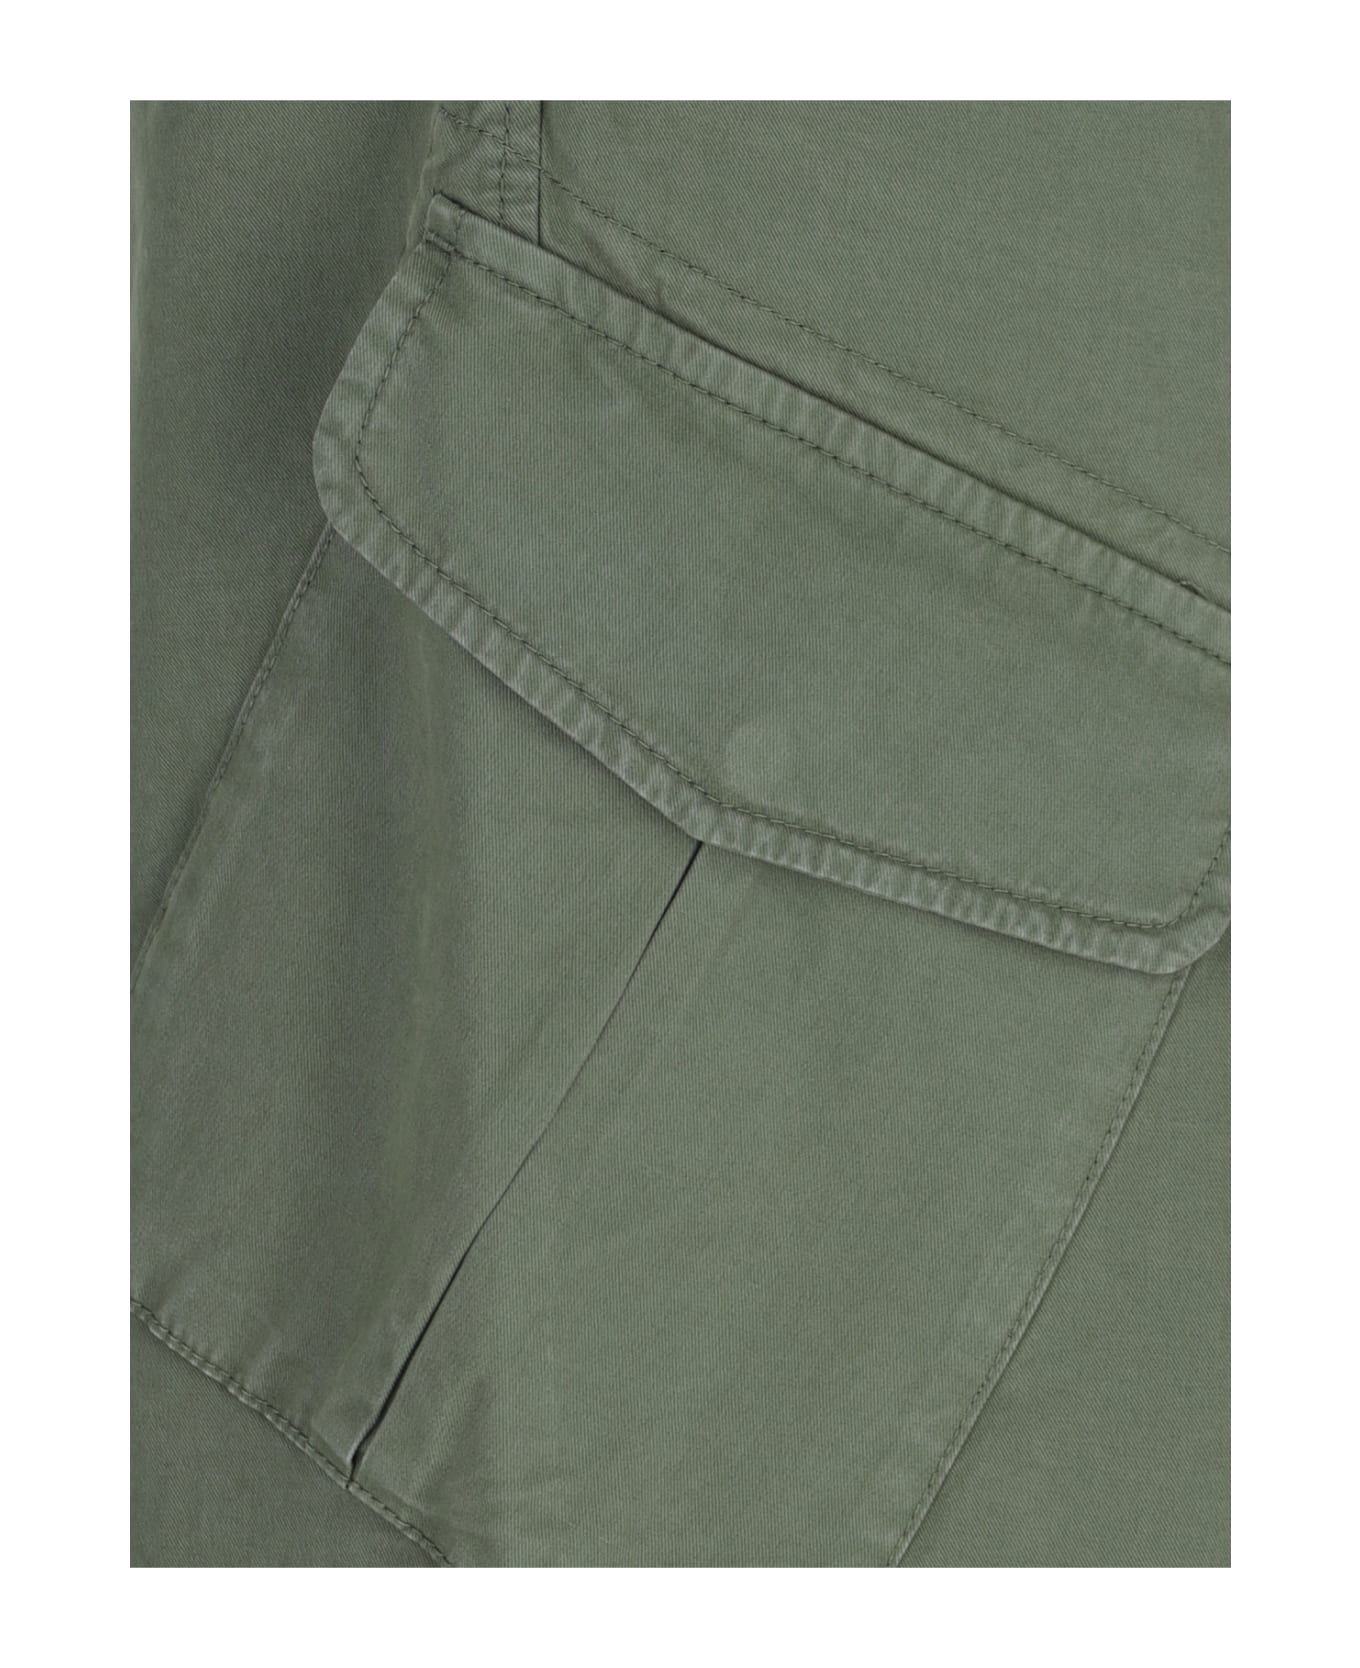 Paul Smith Cargo Trousers - Green ボトムス